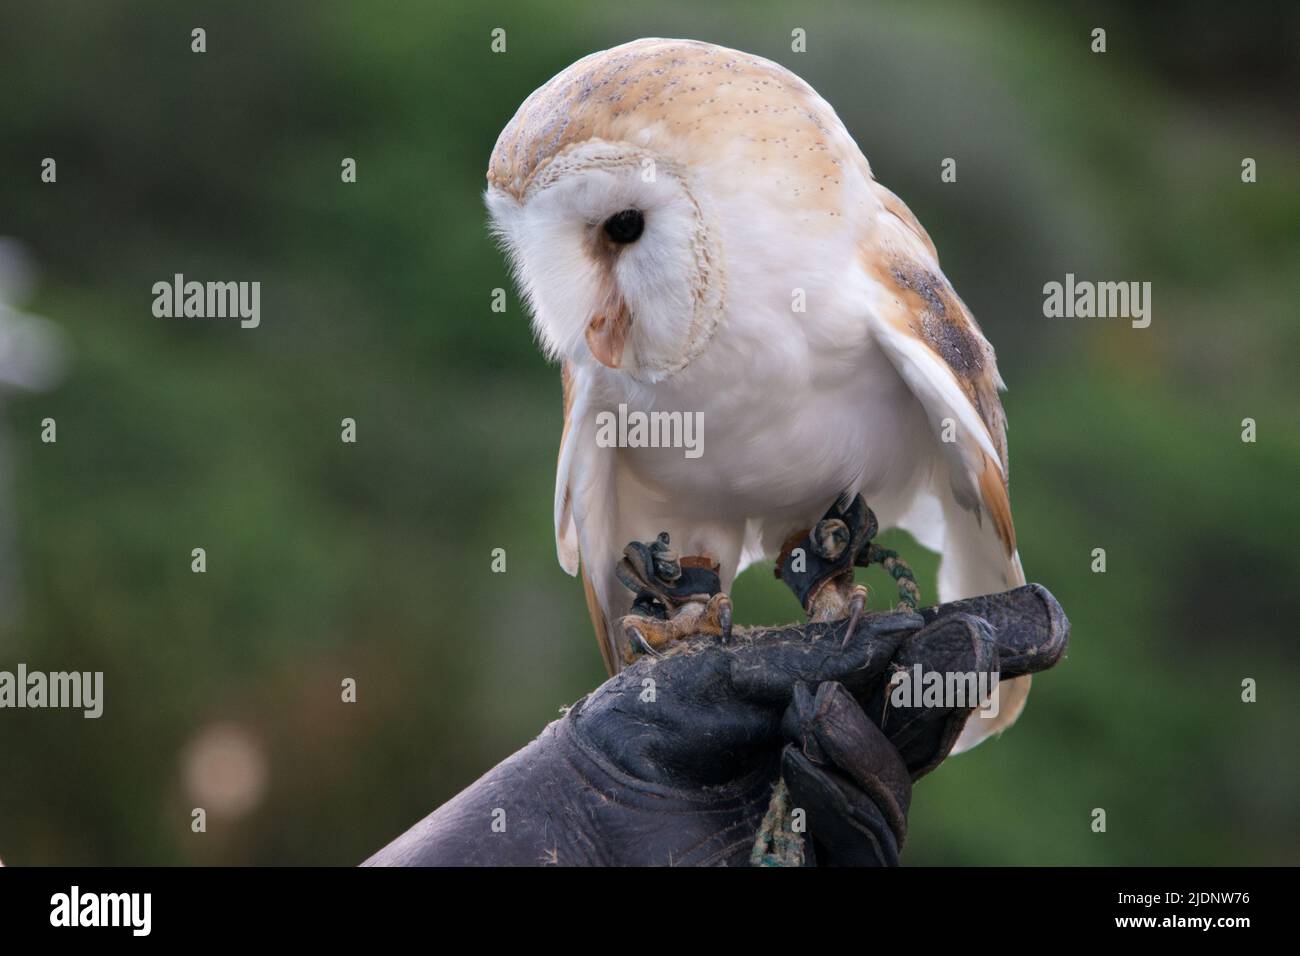 Common barn owl on a human hand wearing a leather glove. Green background Stock Photo